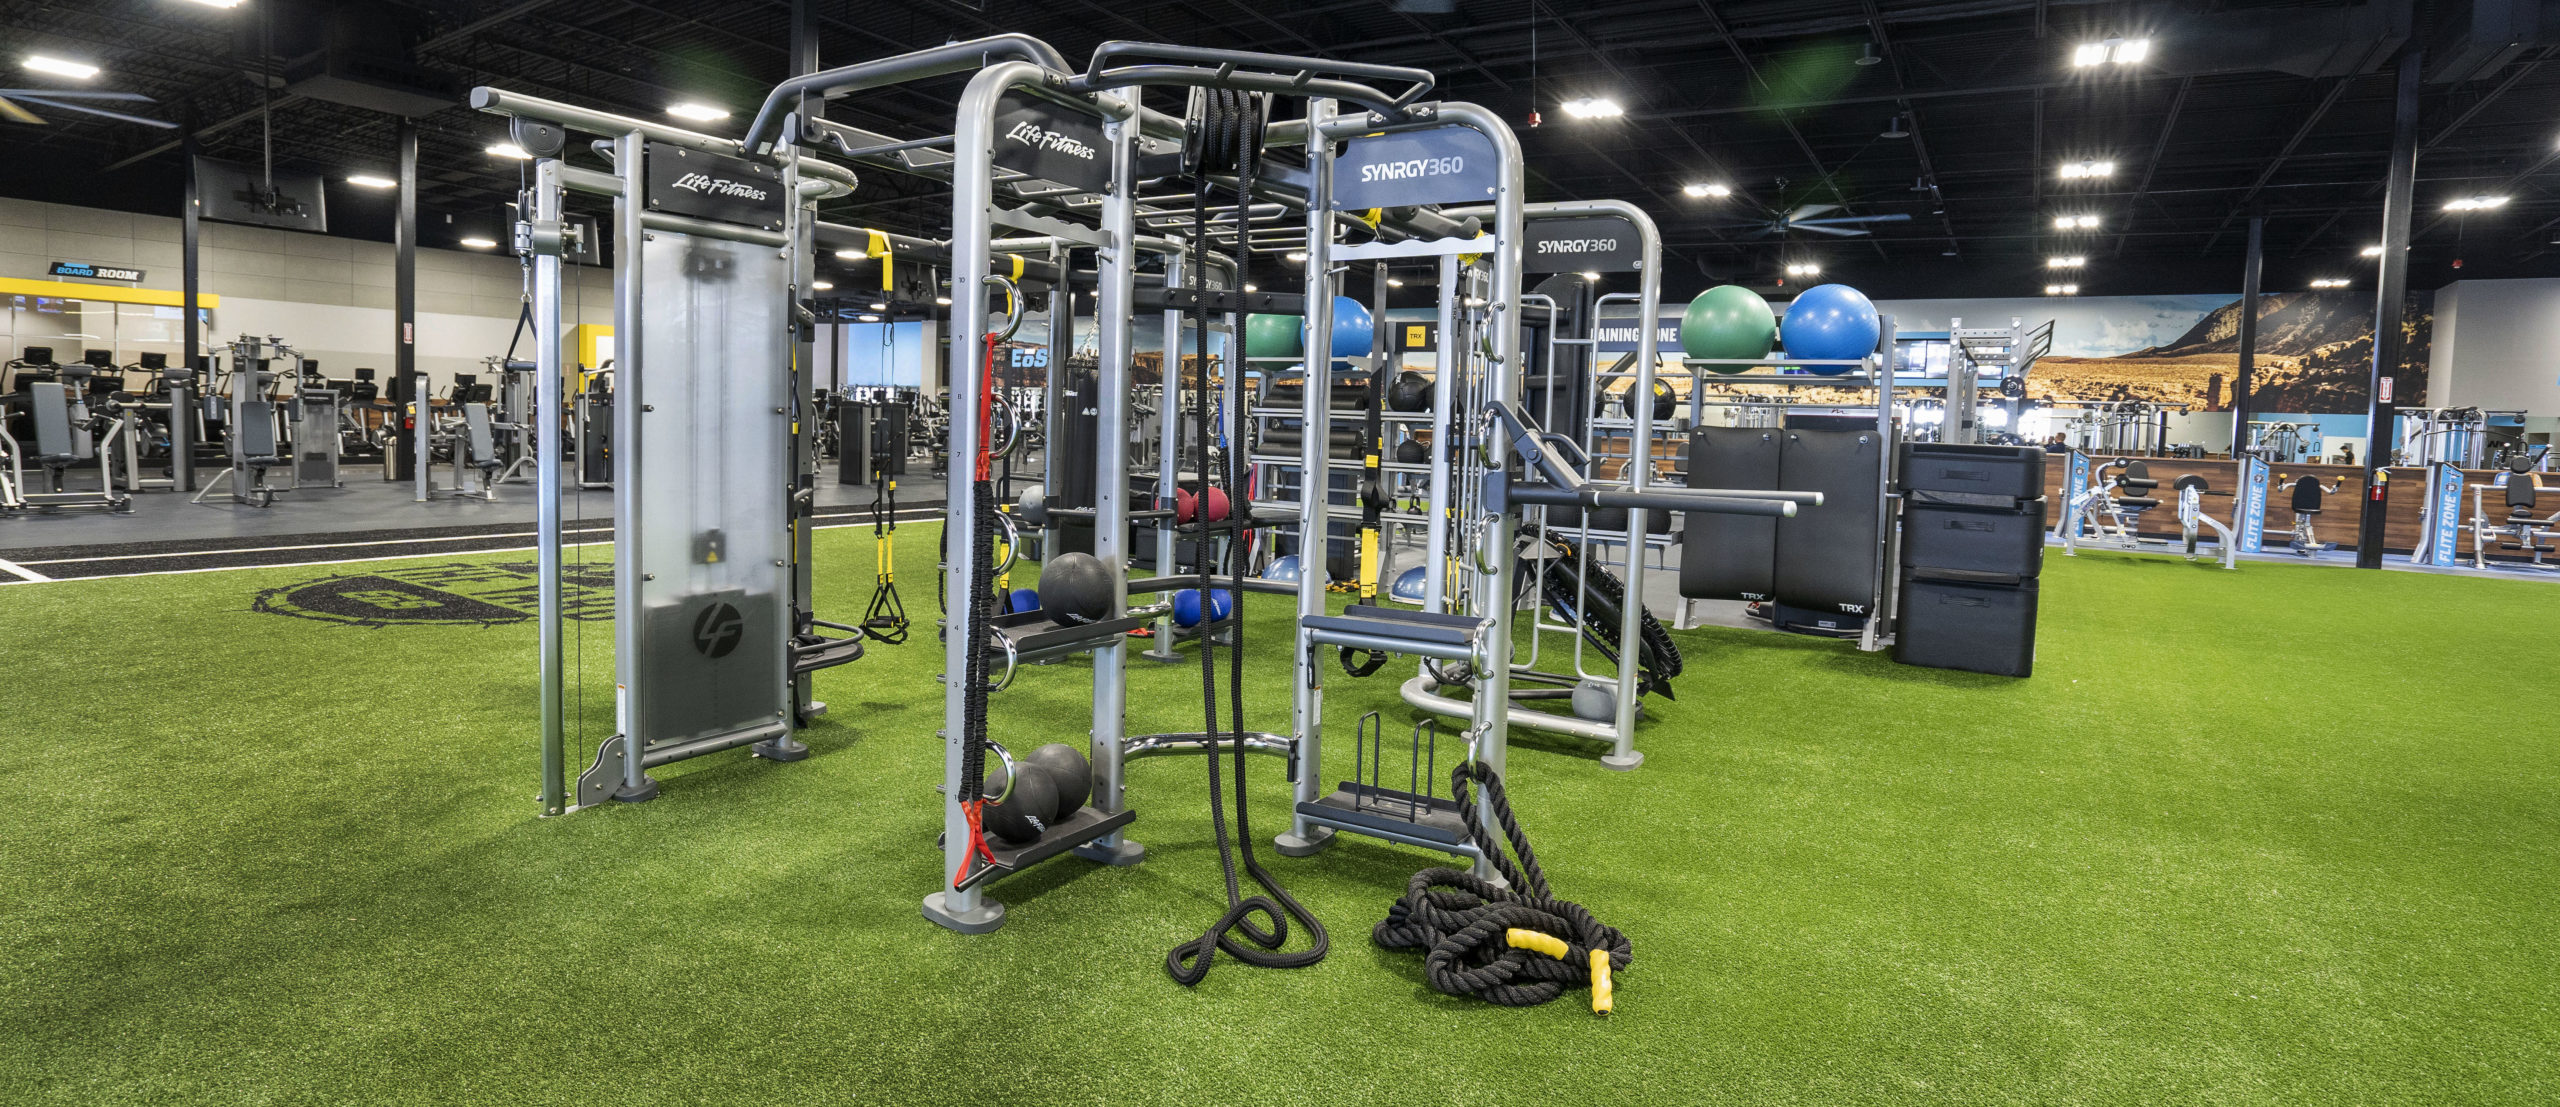 EōS Fitness Brings Premium Fitness Amenities Without the Premium Price Tag to Ladera Ranch